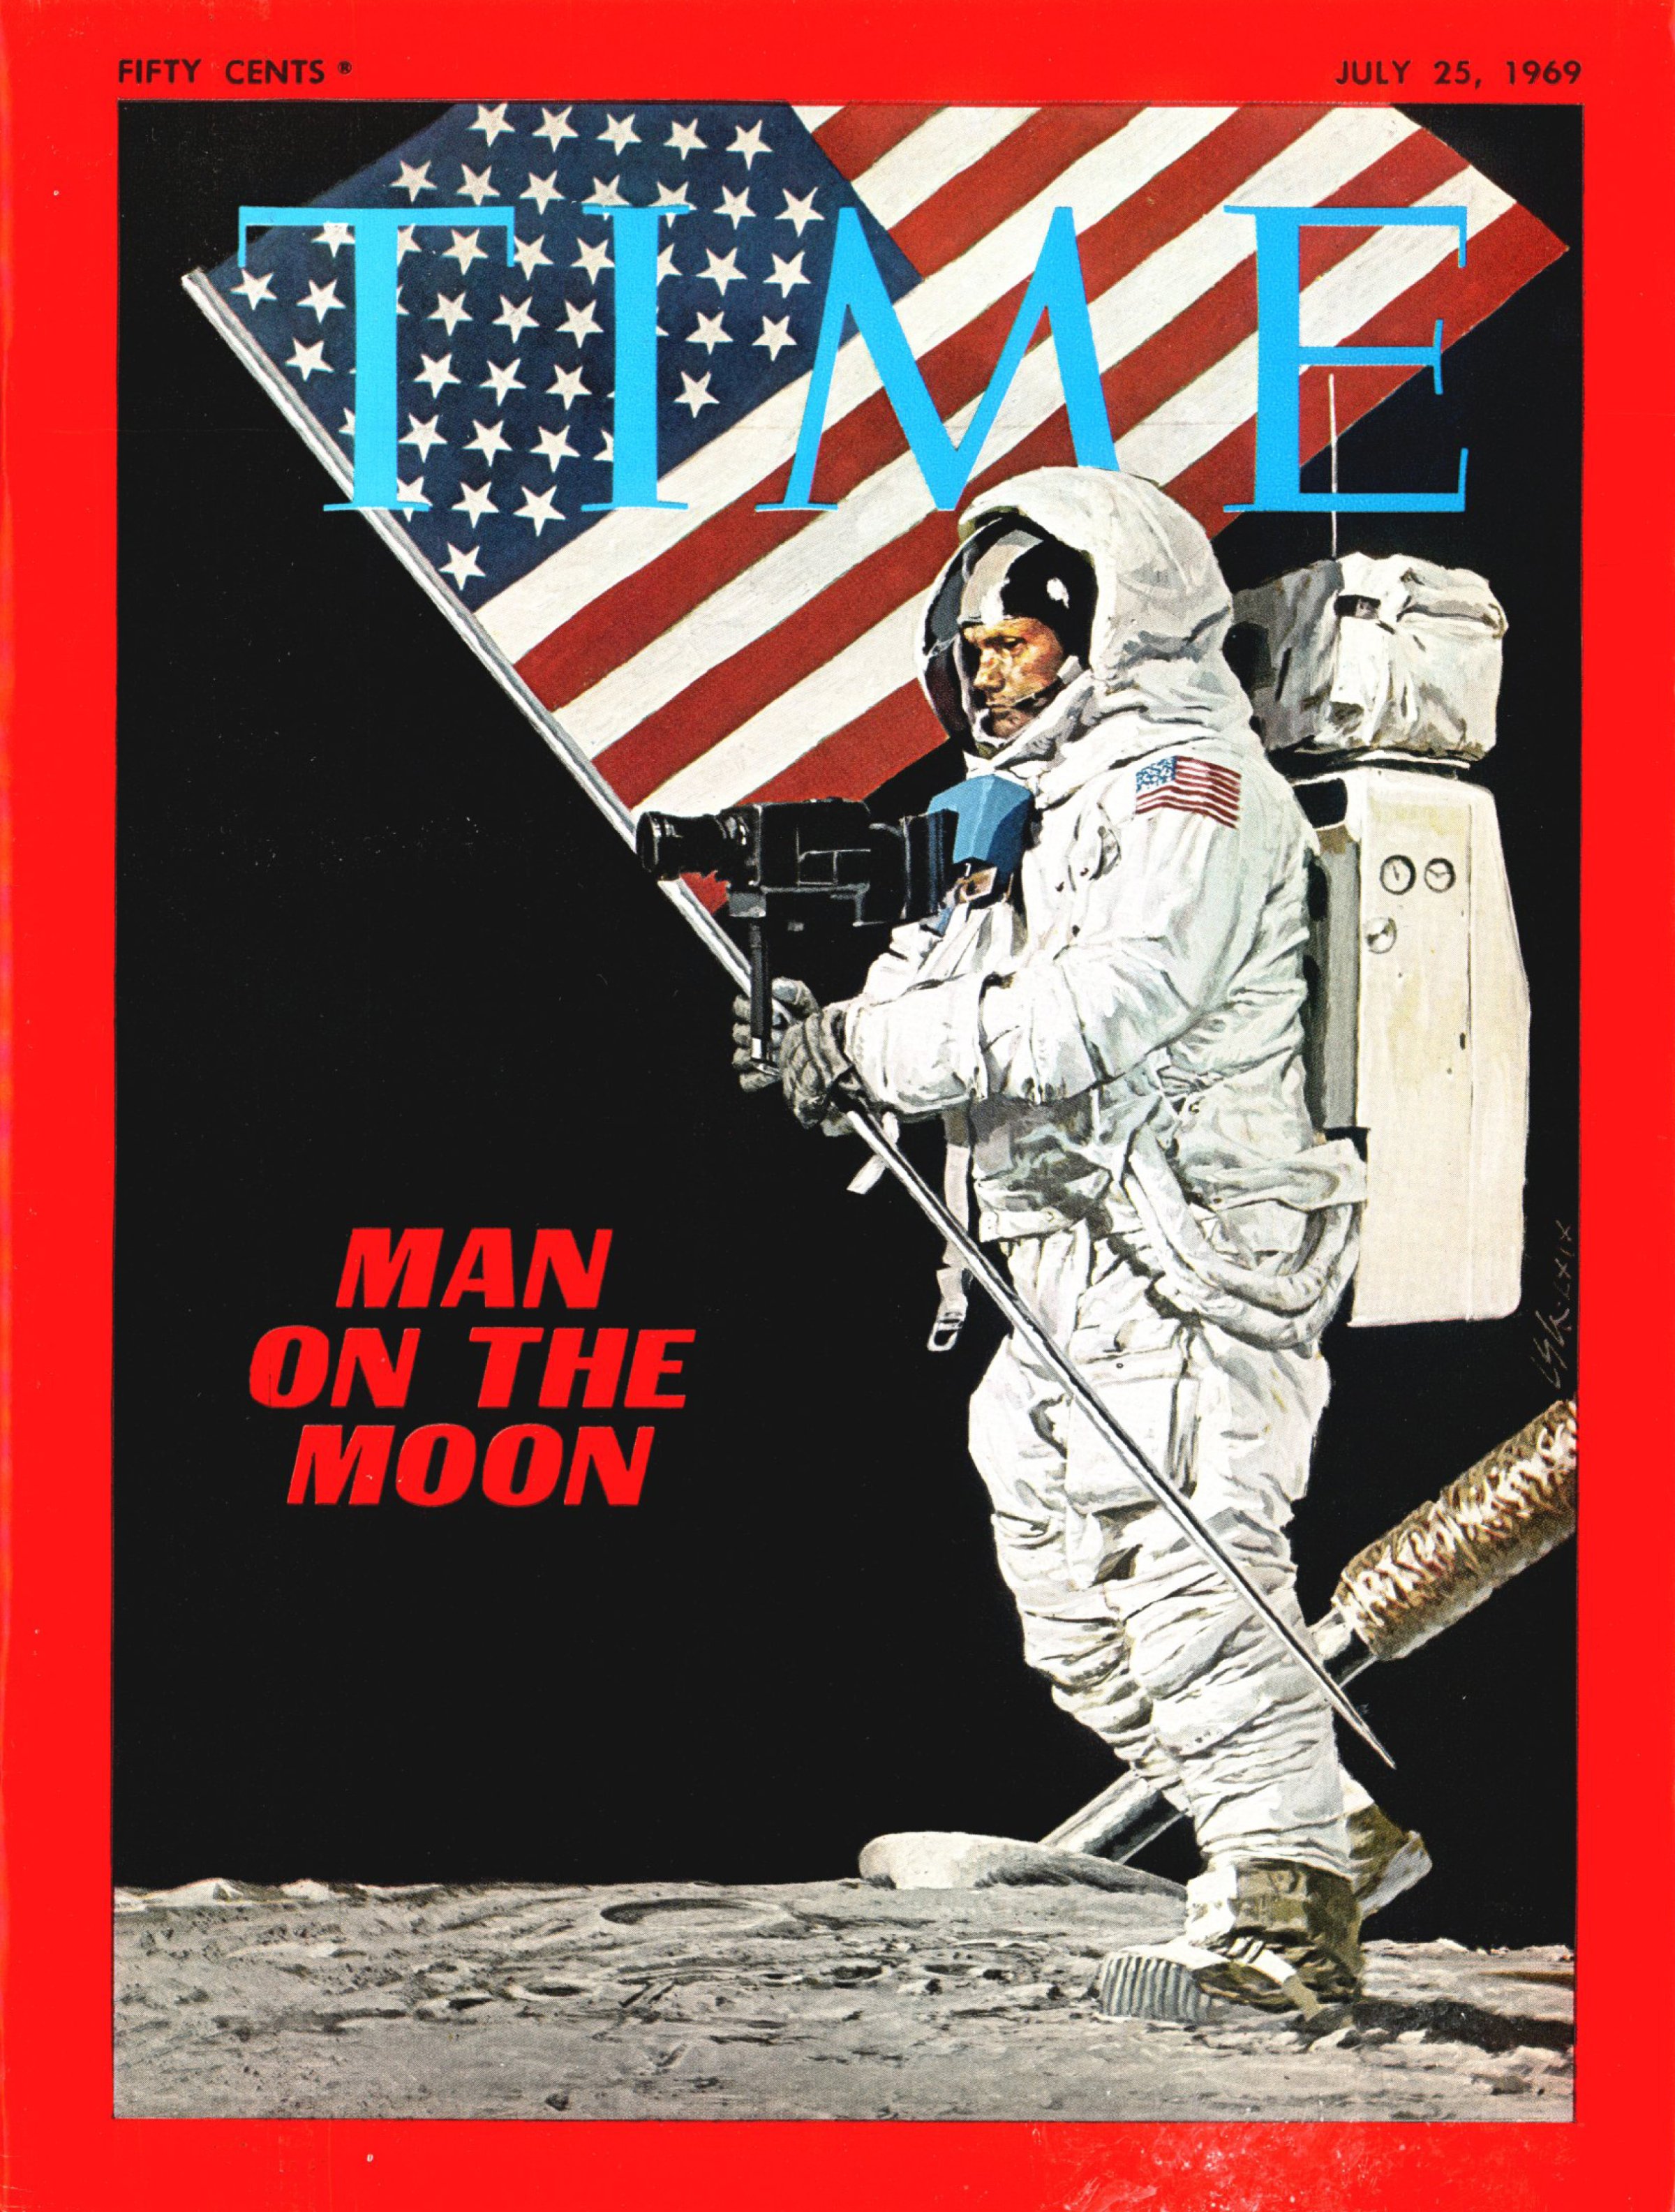 The cover of Time Magazine on July 25, 1969